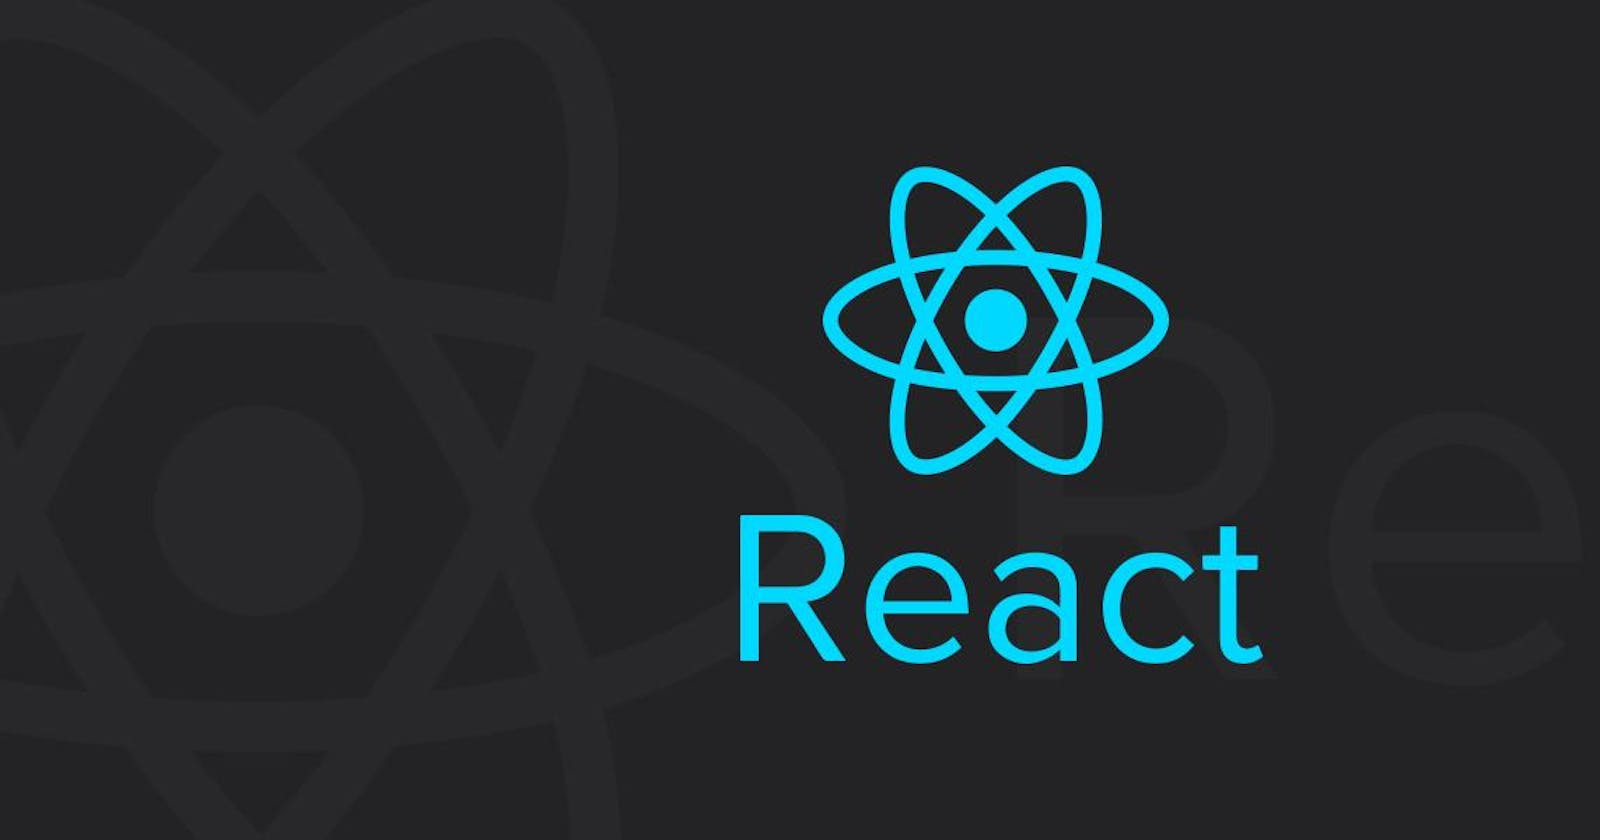 React: The frontend library